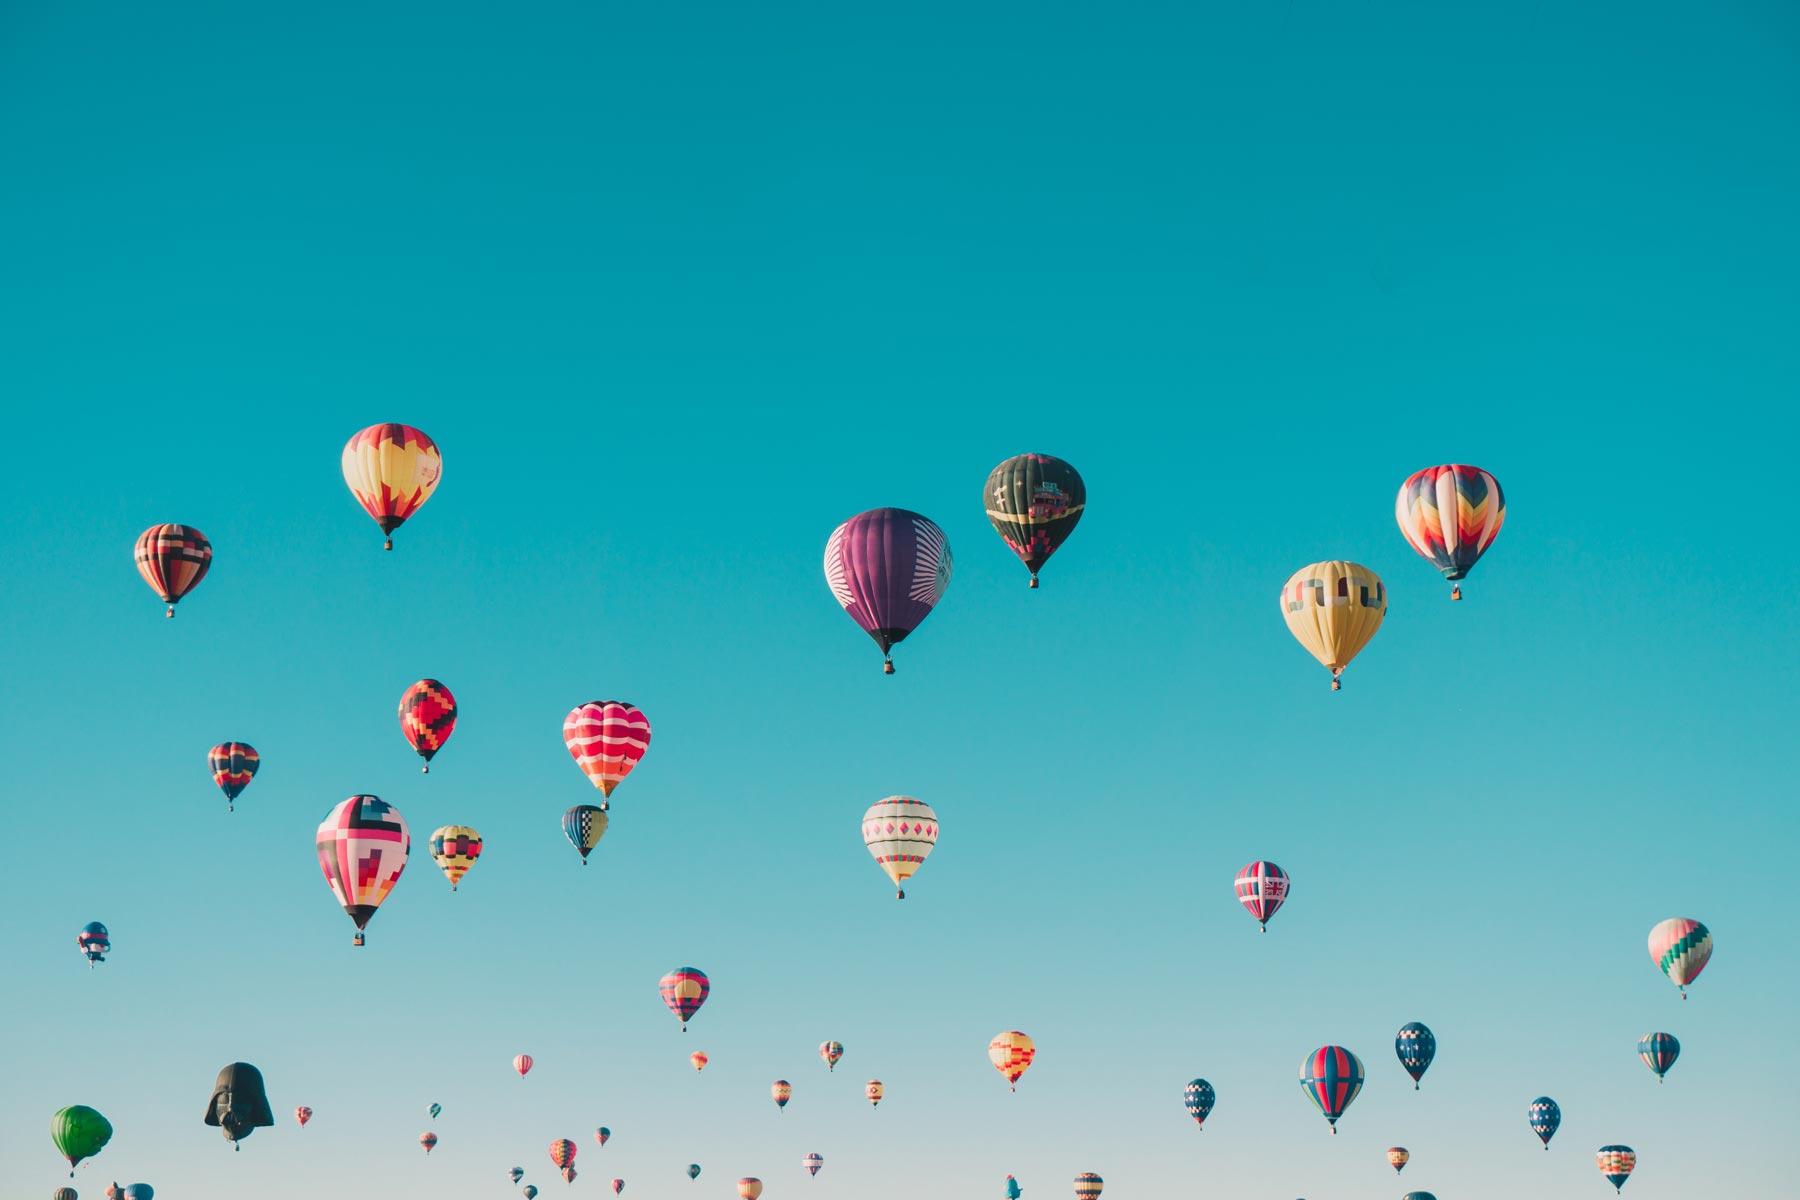 hundreds of multi-colored hot air balloons